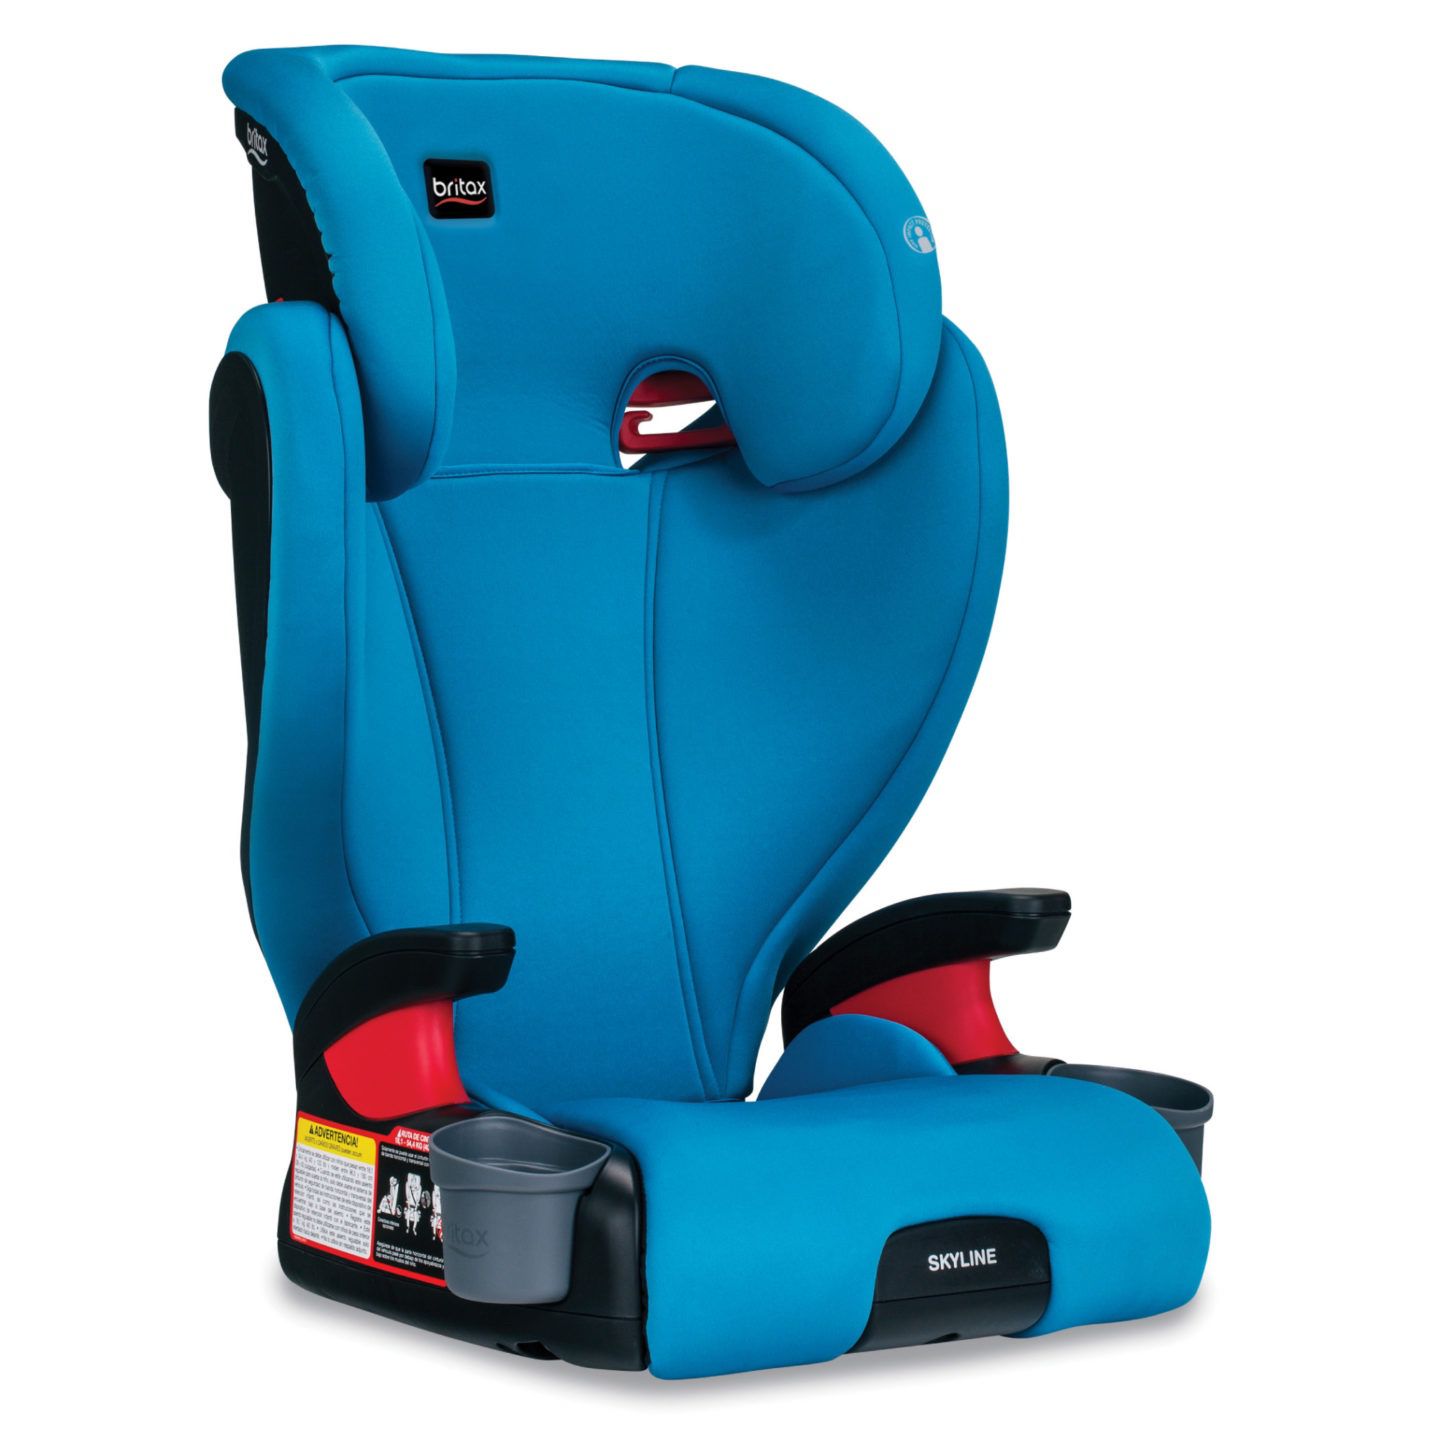 Britax Skyline 2-Stage Belt-Positioning Booster Car Seat Teal - BRAND NEW